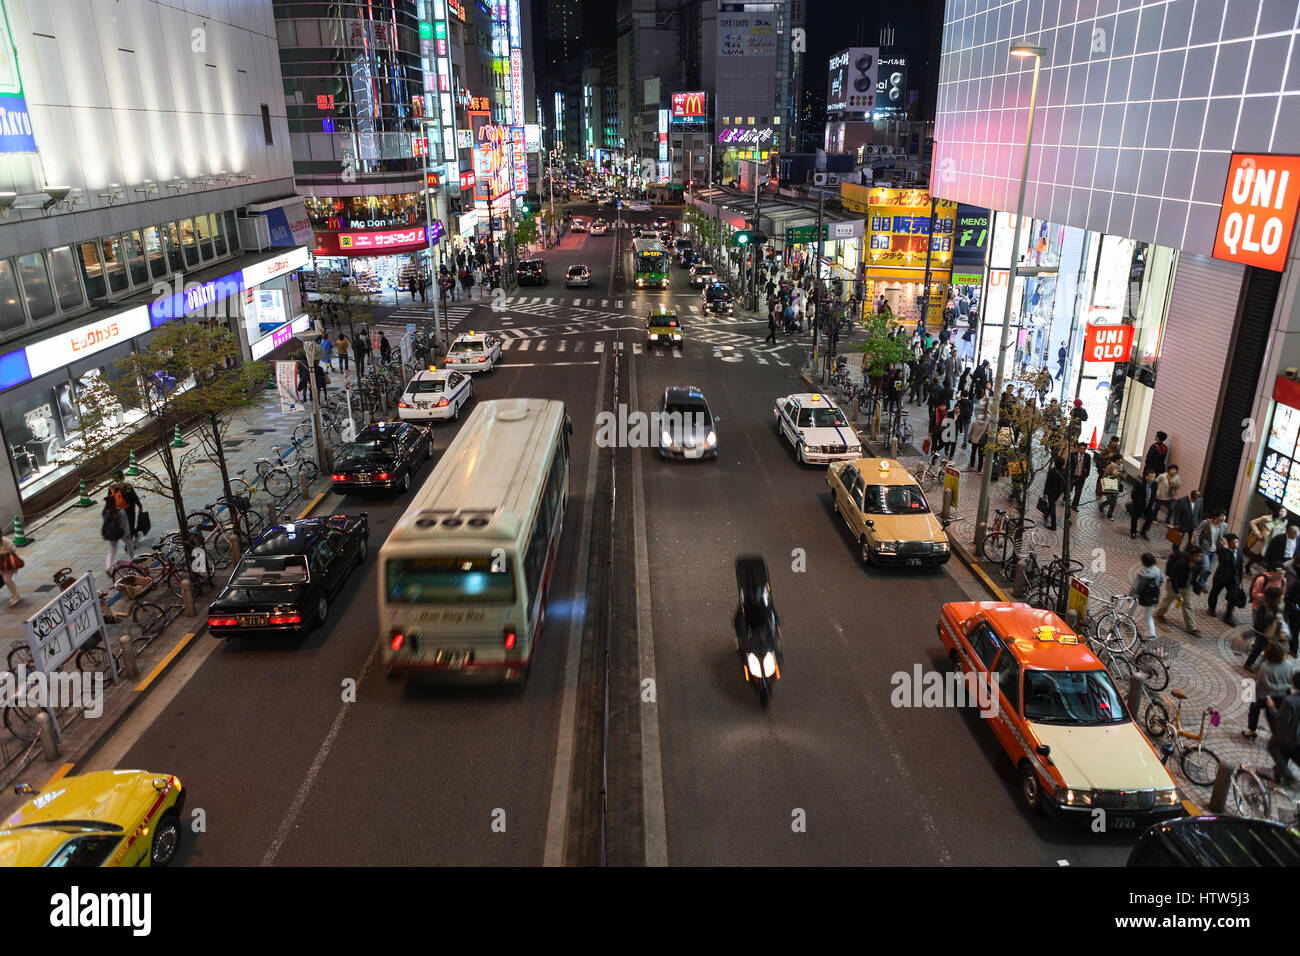 TOKYO, JAPAN - CIRCA APR, 2013: Crossroad with vehicles is in downtown. Illuminated advertising banners are on building facades. Nightlife is on the s Stock Photo